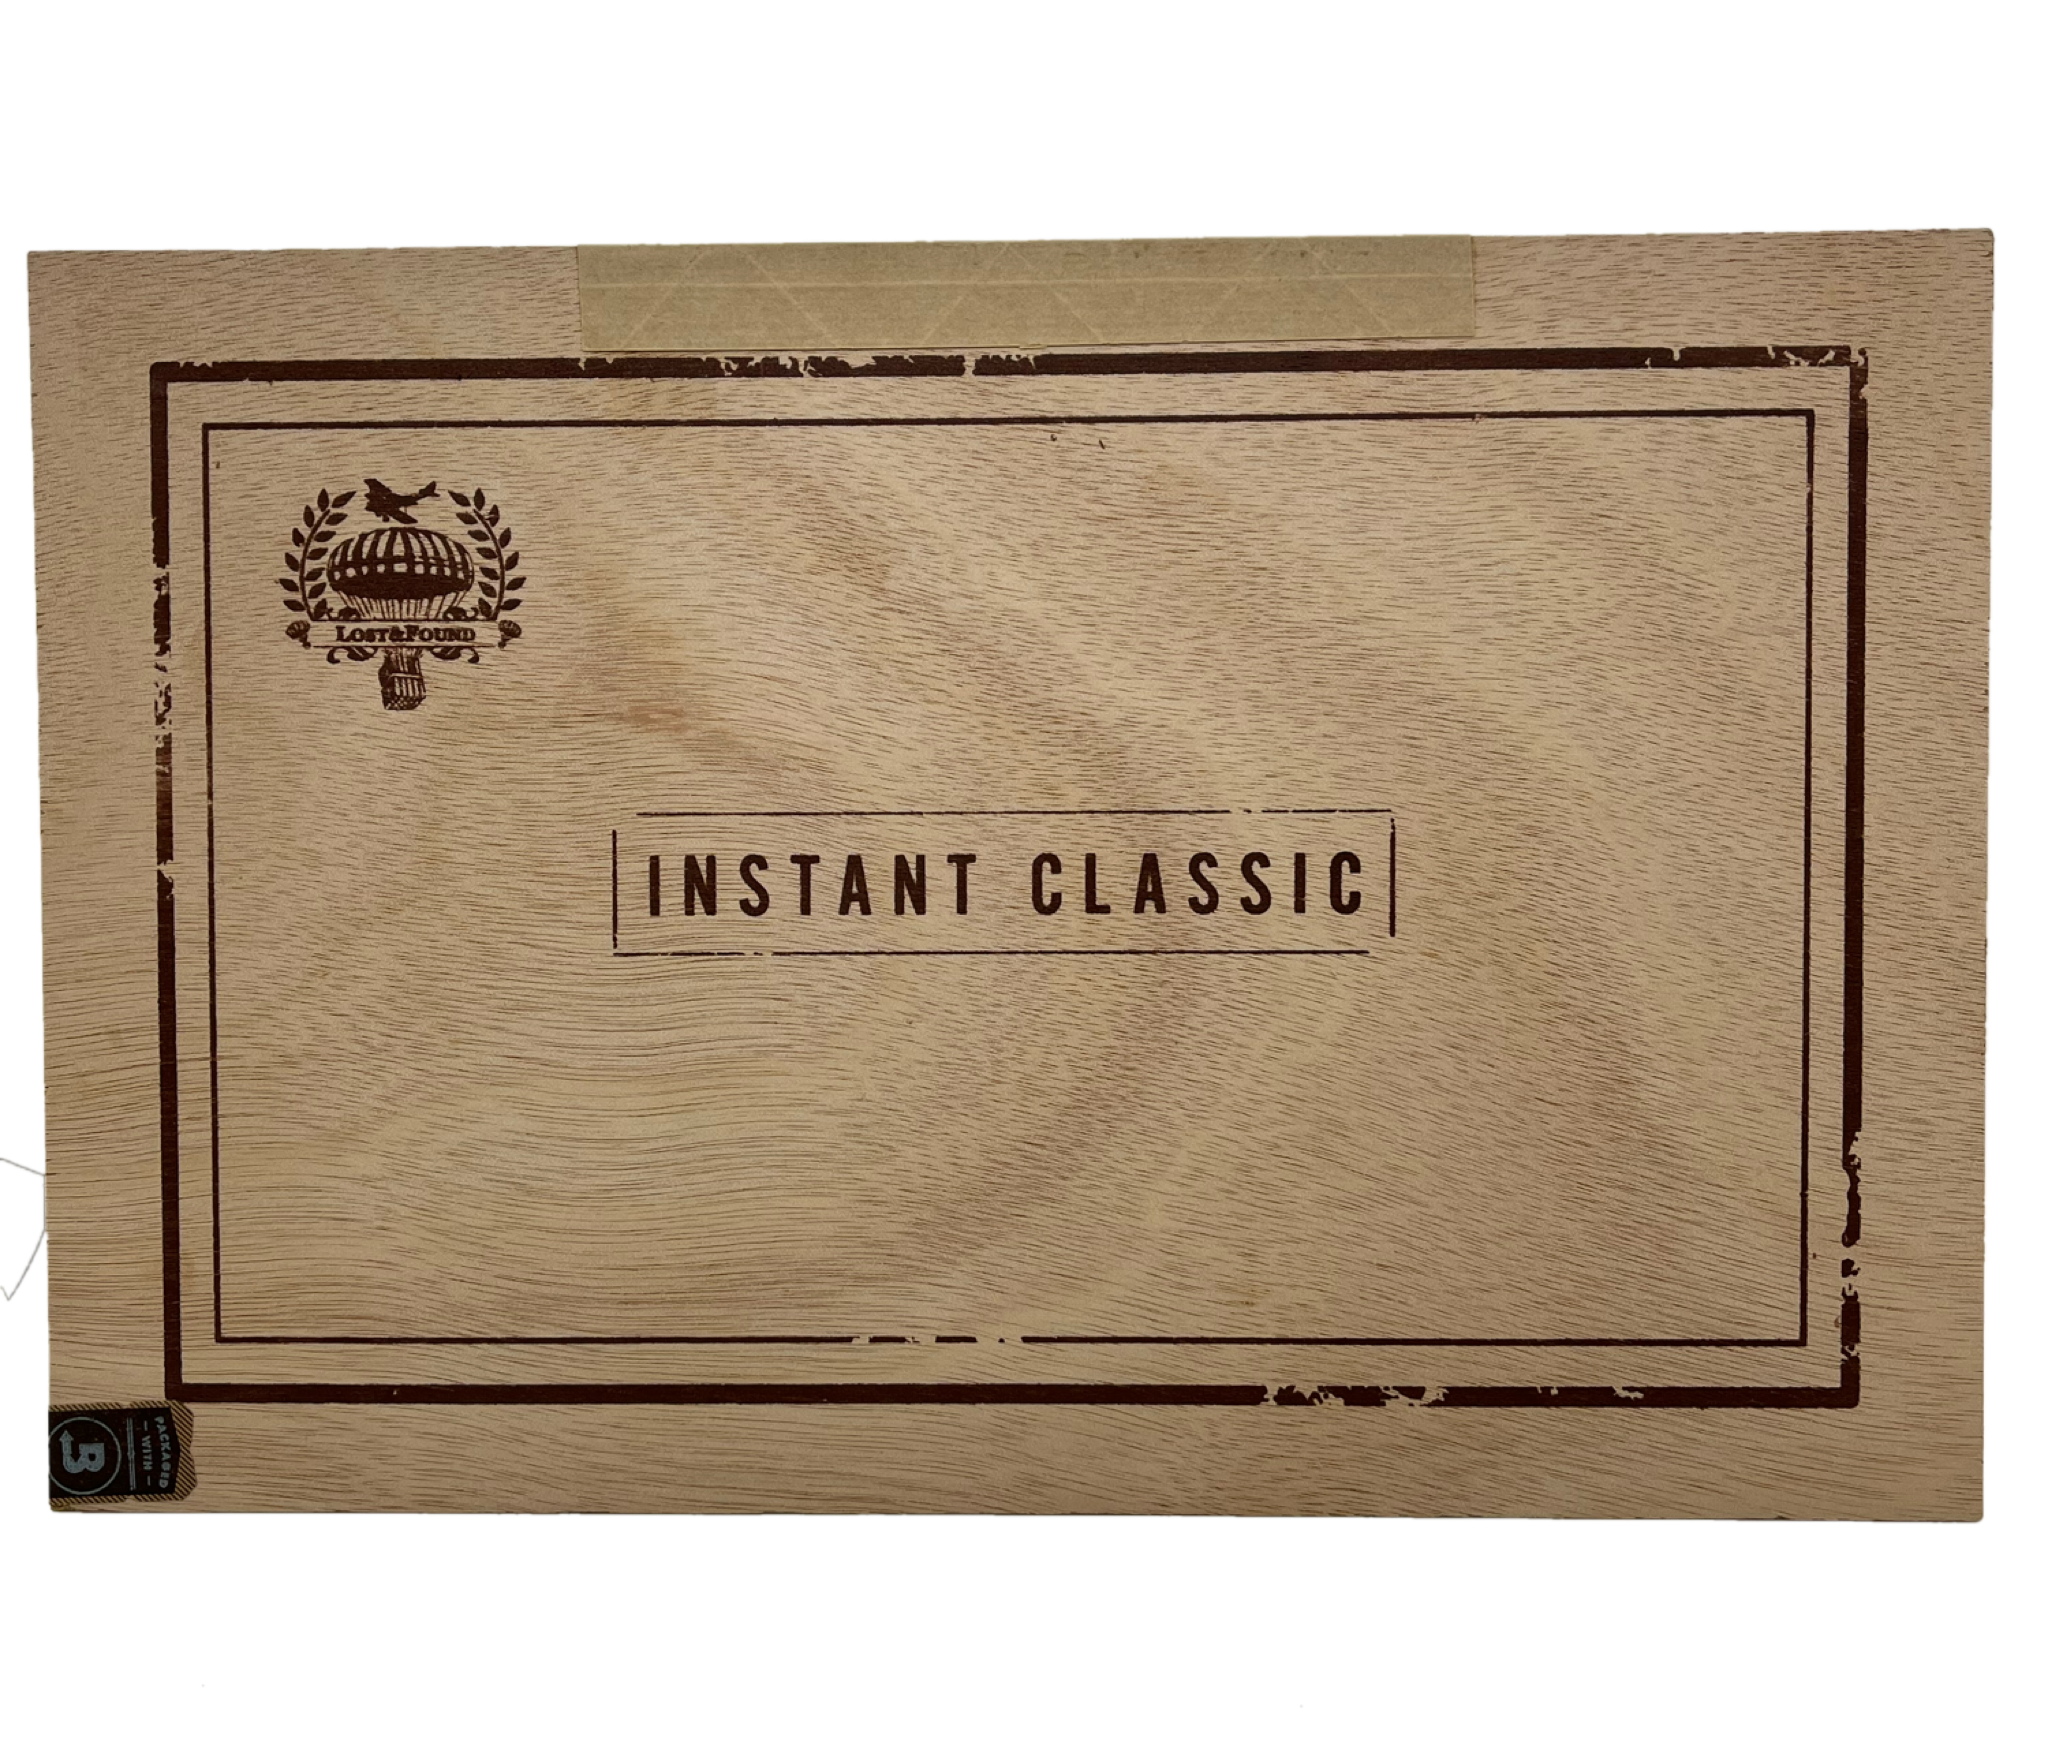 LOST & FOUND INSTANT CLASSIC LIMITED EDITION